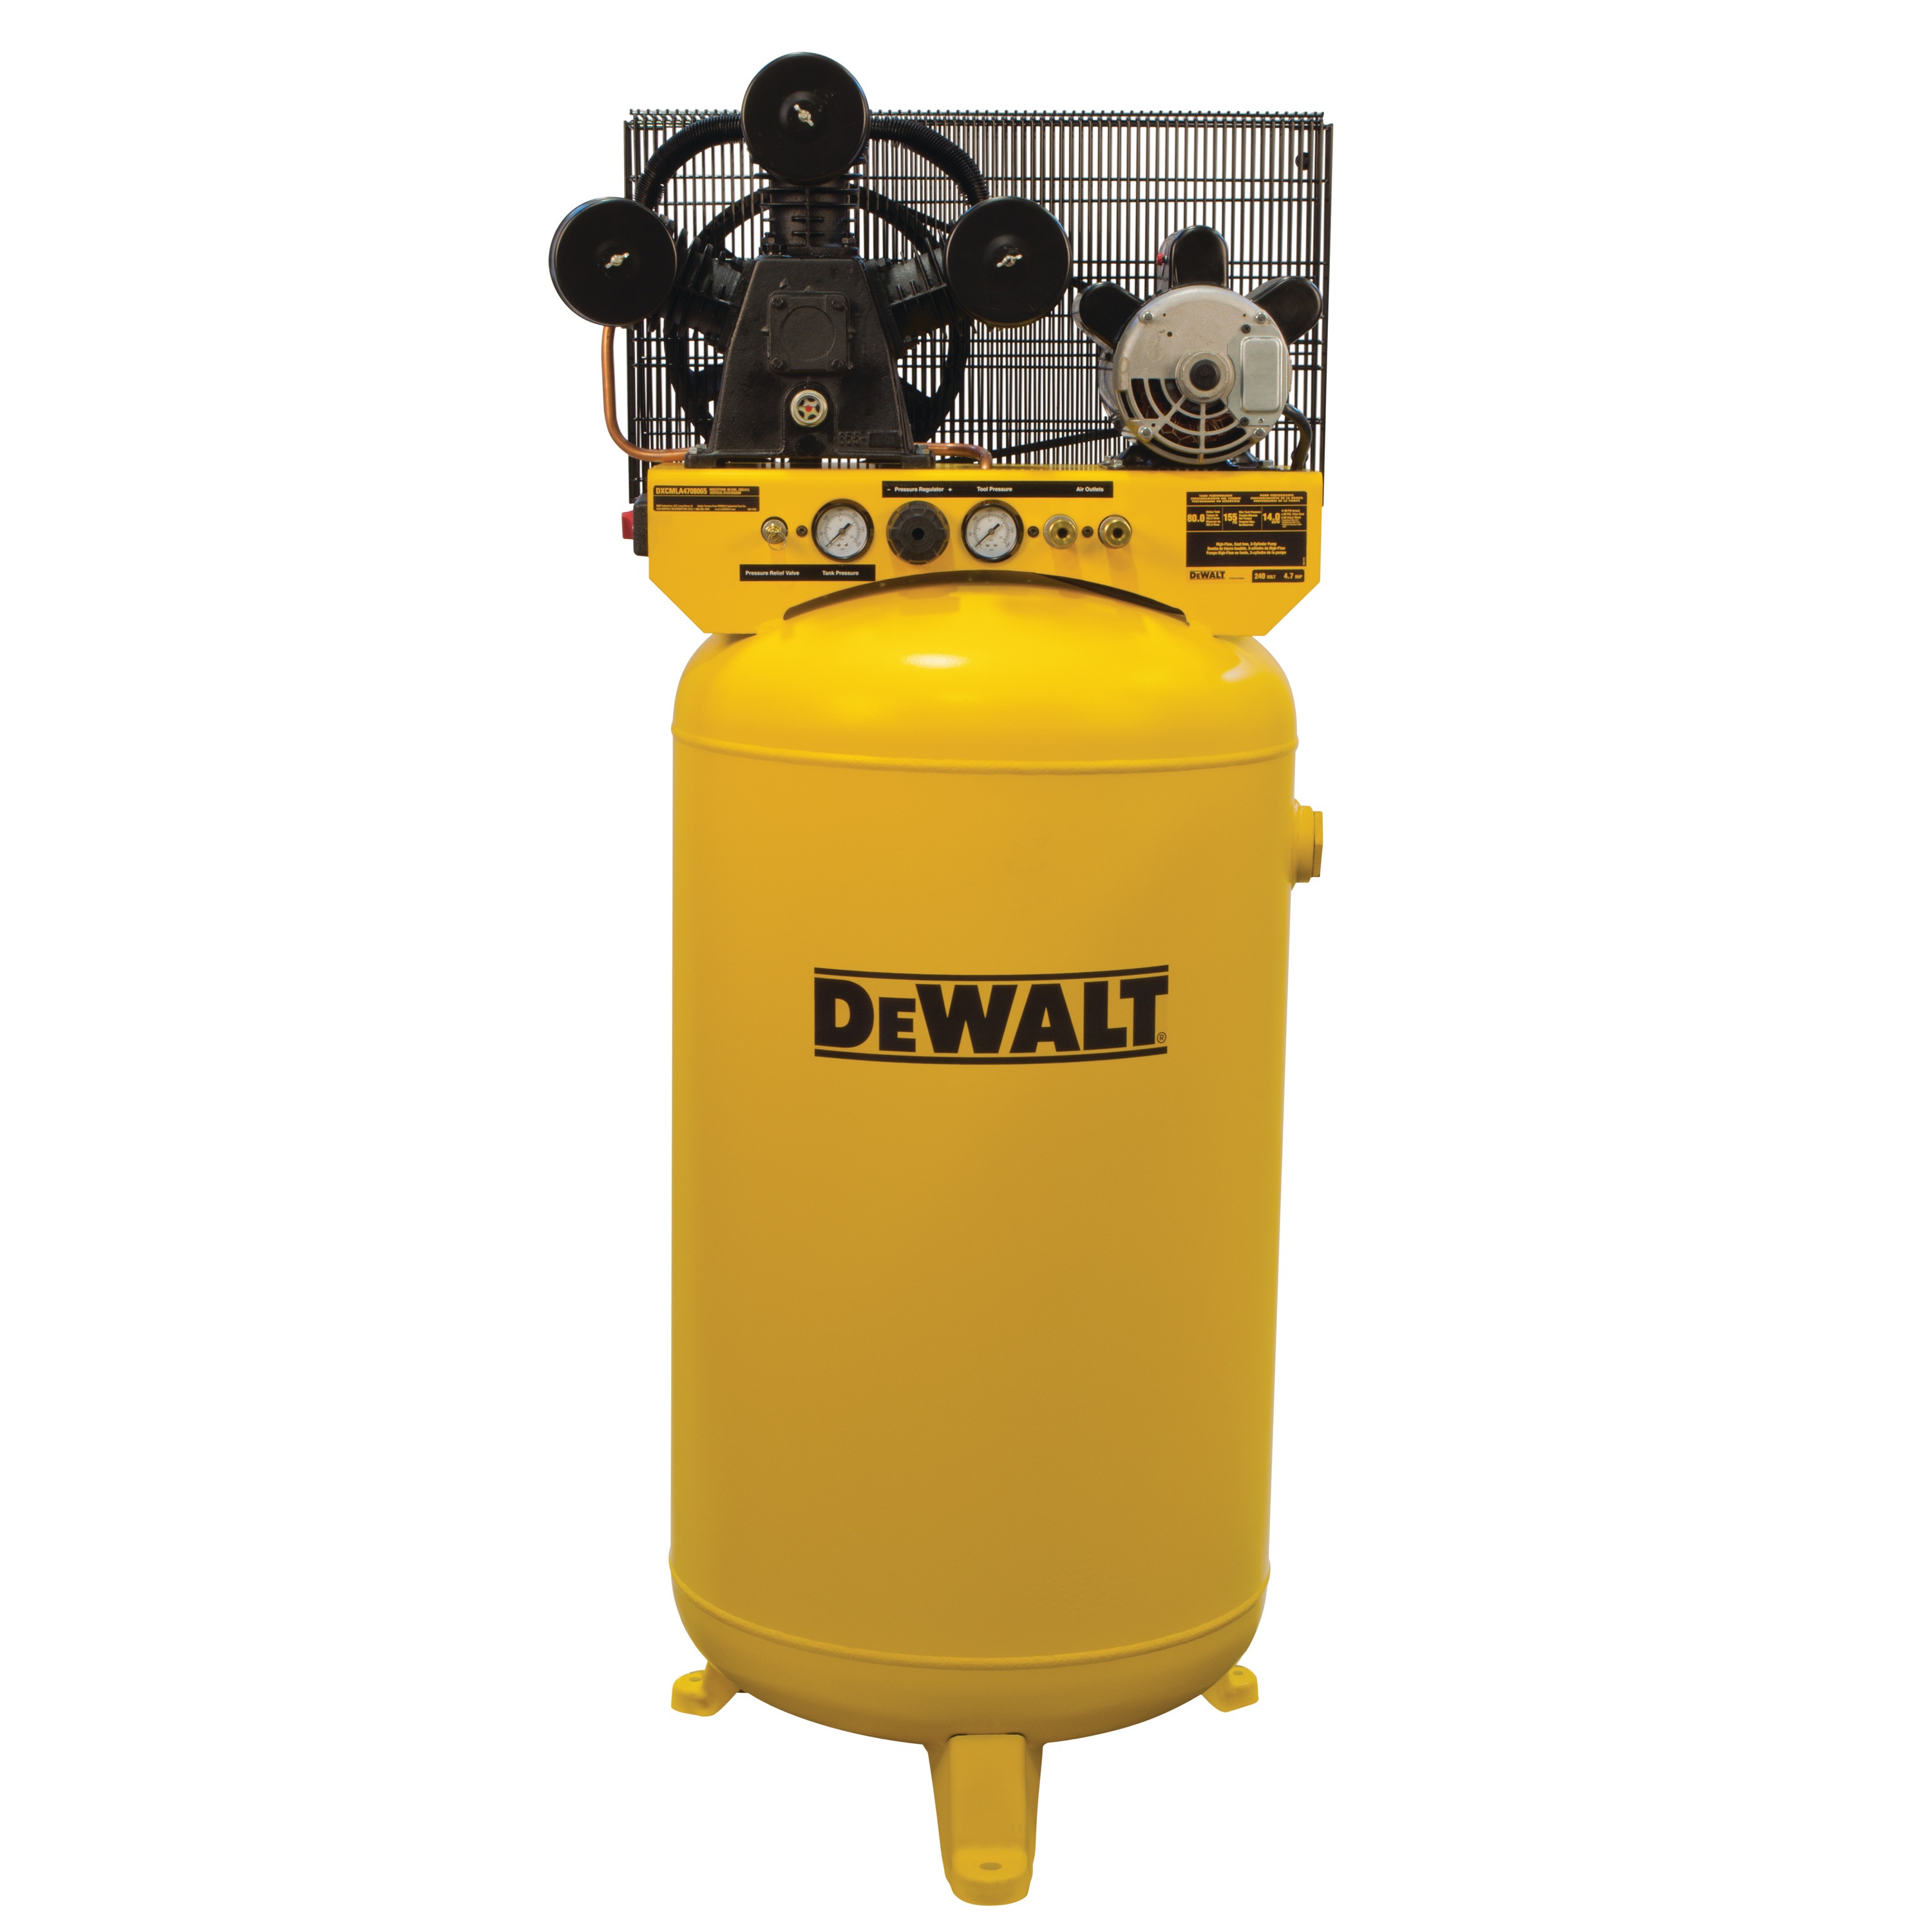 Profile of 80 gallons Vertical Stationary Electric Air Compressor.